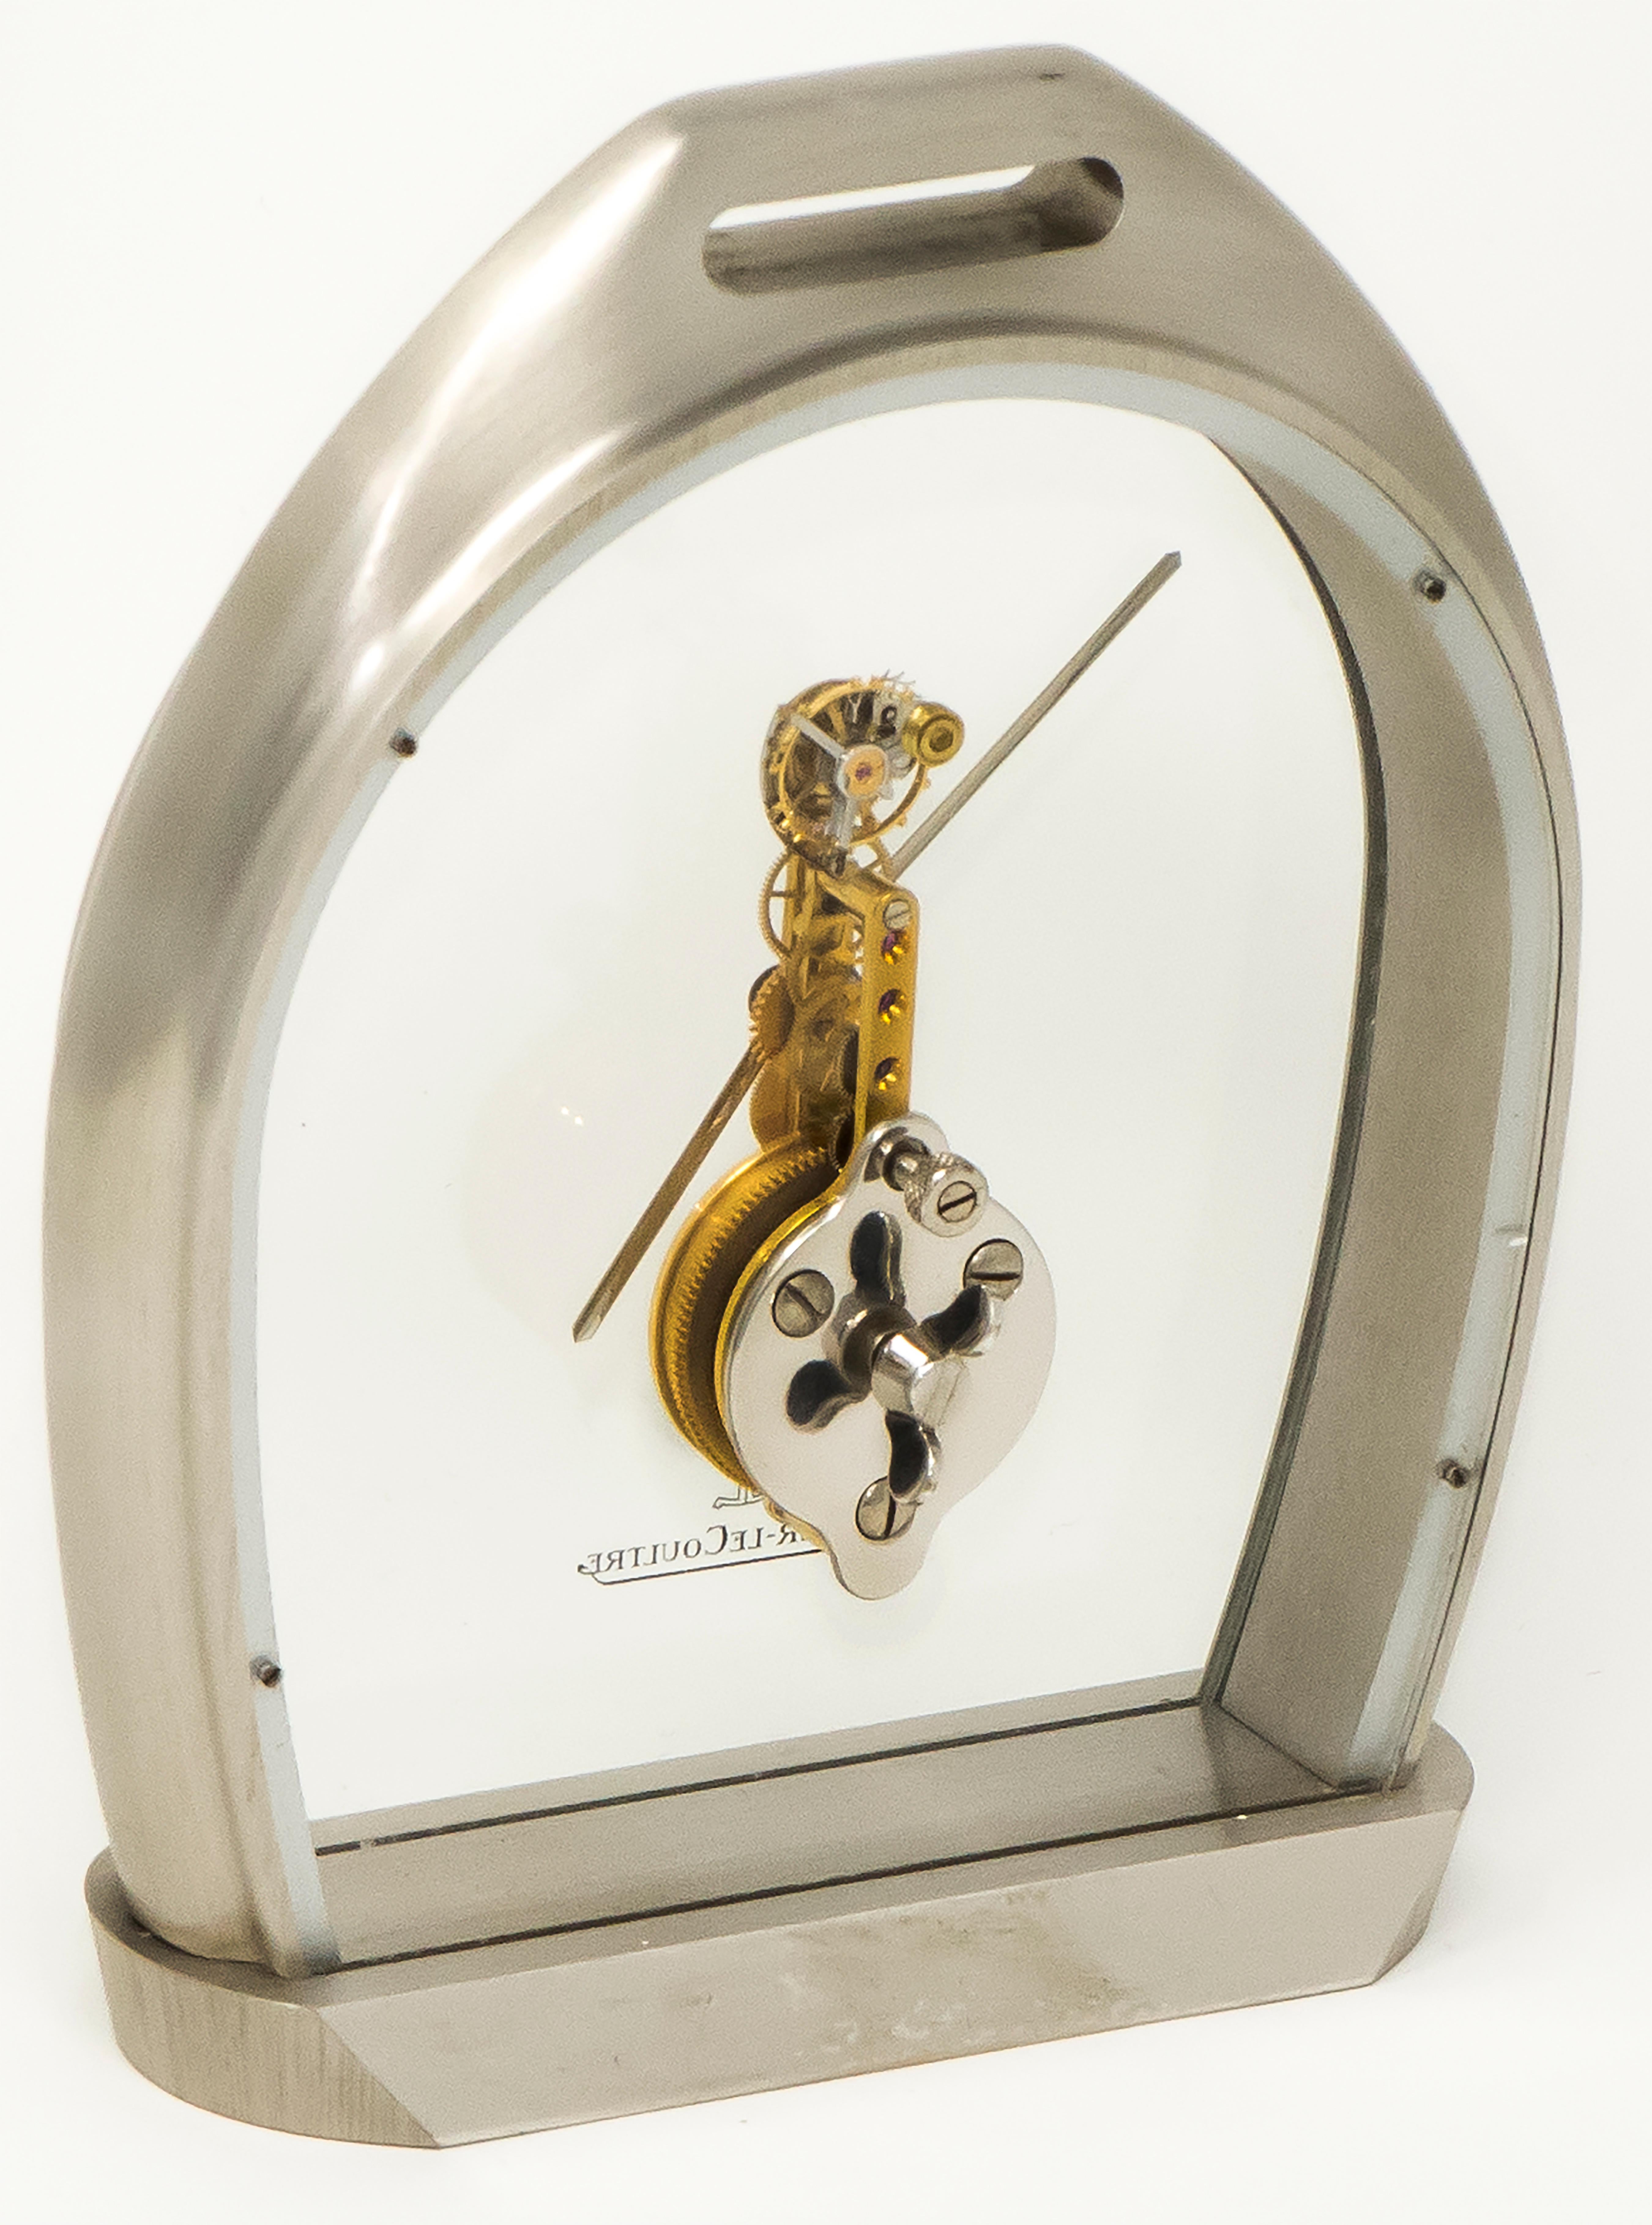 Rare 1970s Jaeger Le Coultre Tourbillion Ruby Gold Stainless Steel Stirrup Clock For Sale 4